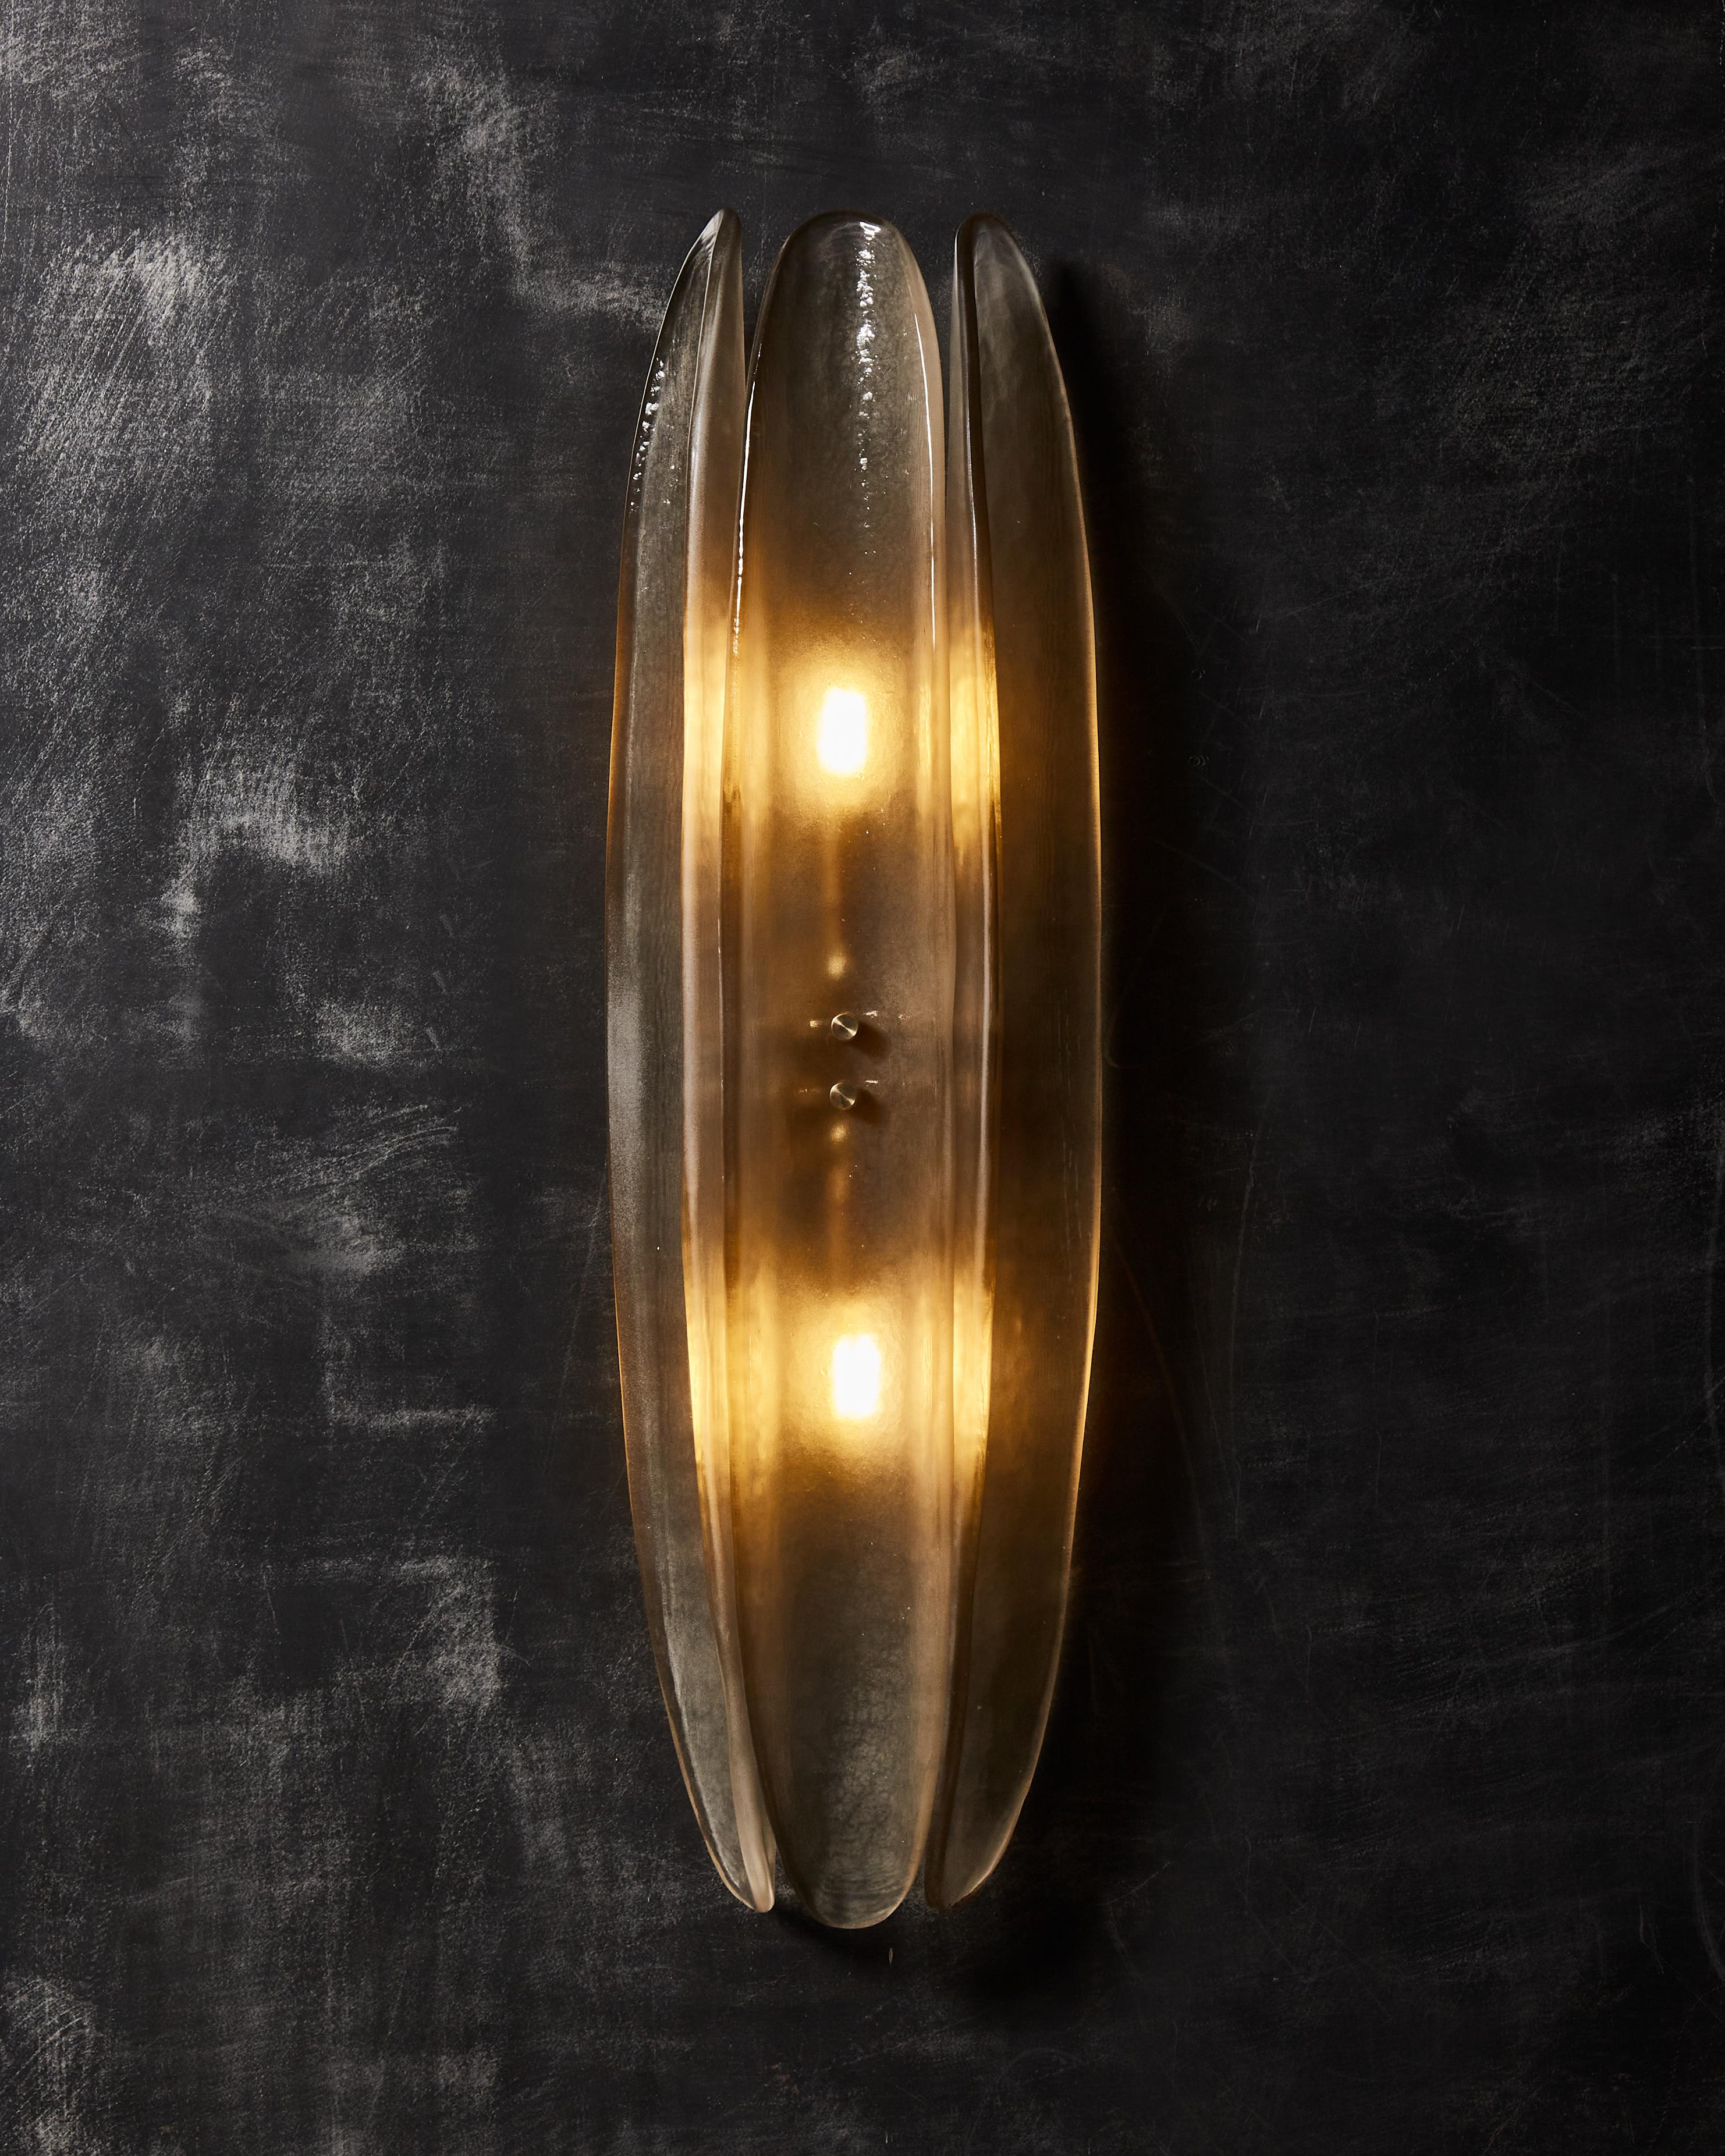 Pair of wall sconces made of three Murano glass elongated parts with brass settings.